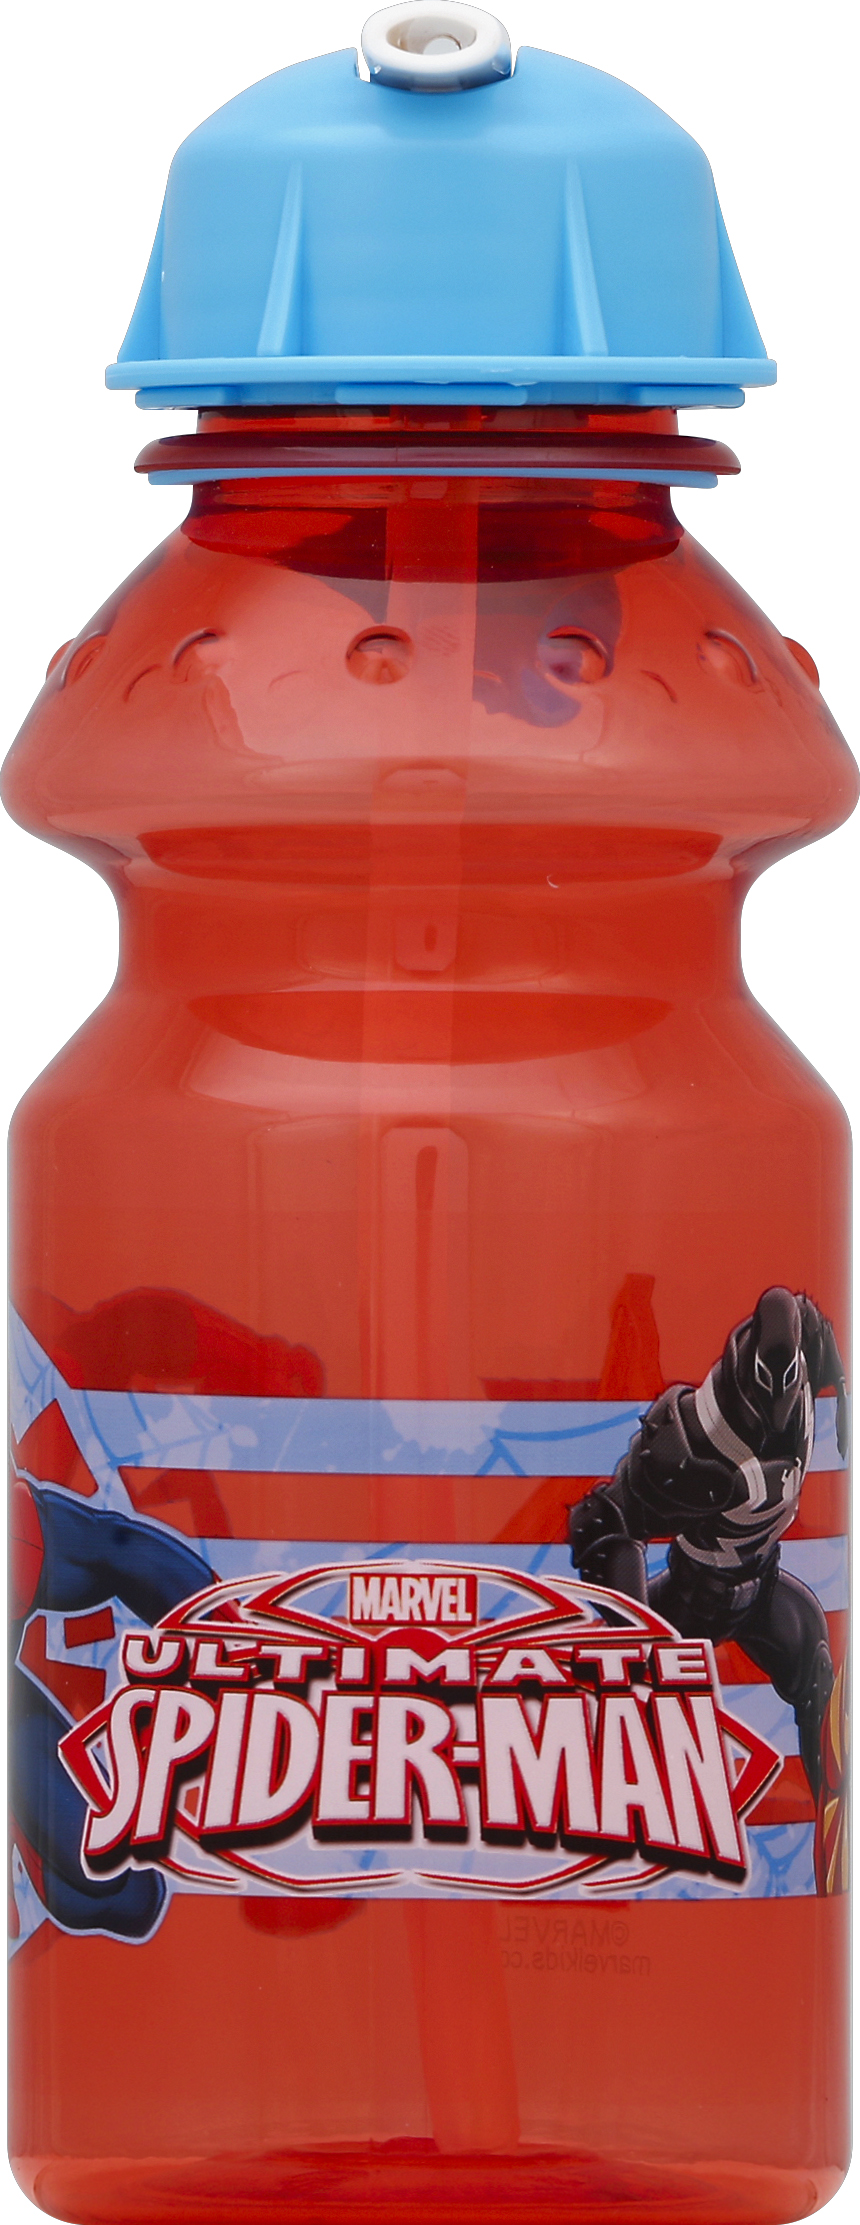 Zak Designs Marvel Comics Spider-Man Kids Water Bottle with Straw and Built-in Carrying Loop, Durable Bottle Has Wide Mouth and Break Resistant Design is Perfect for Kids (14oz, Tritan, BPA-Free) - image 2 of 2